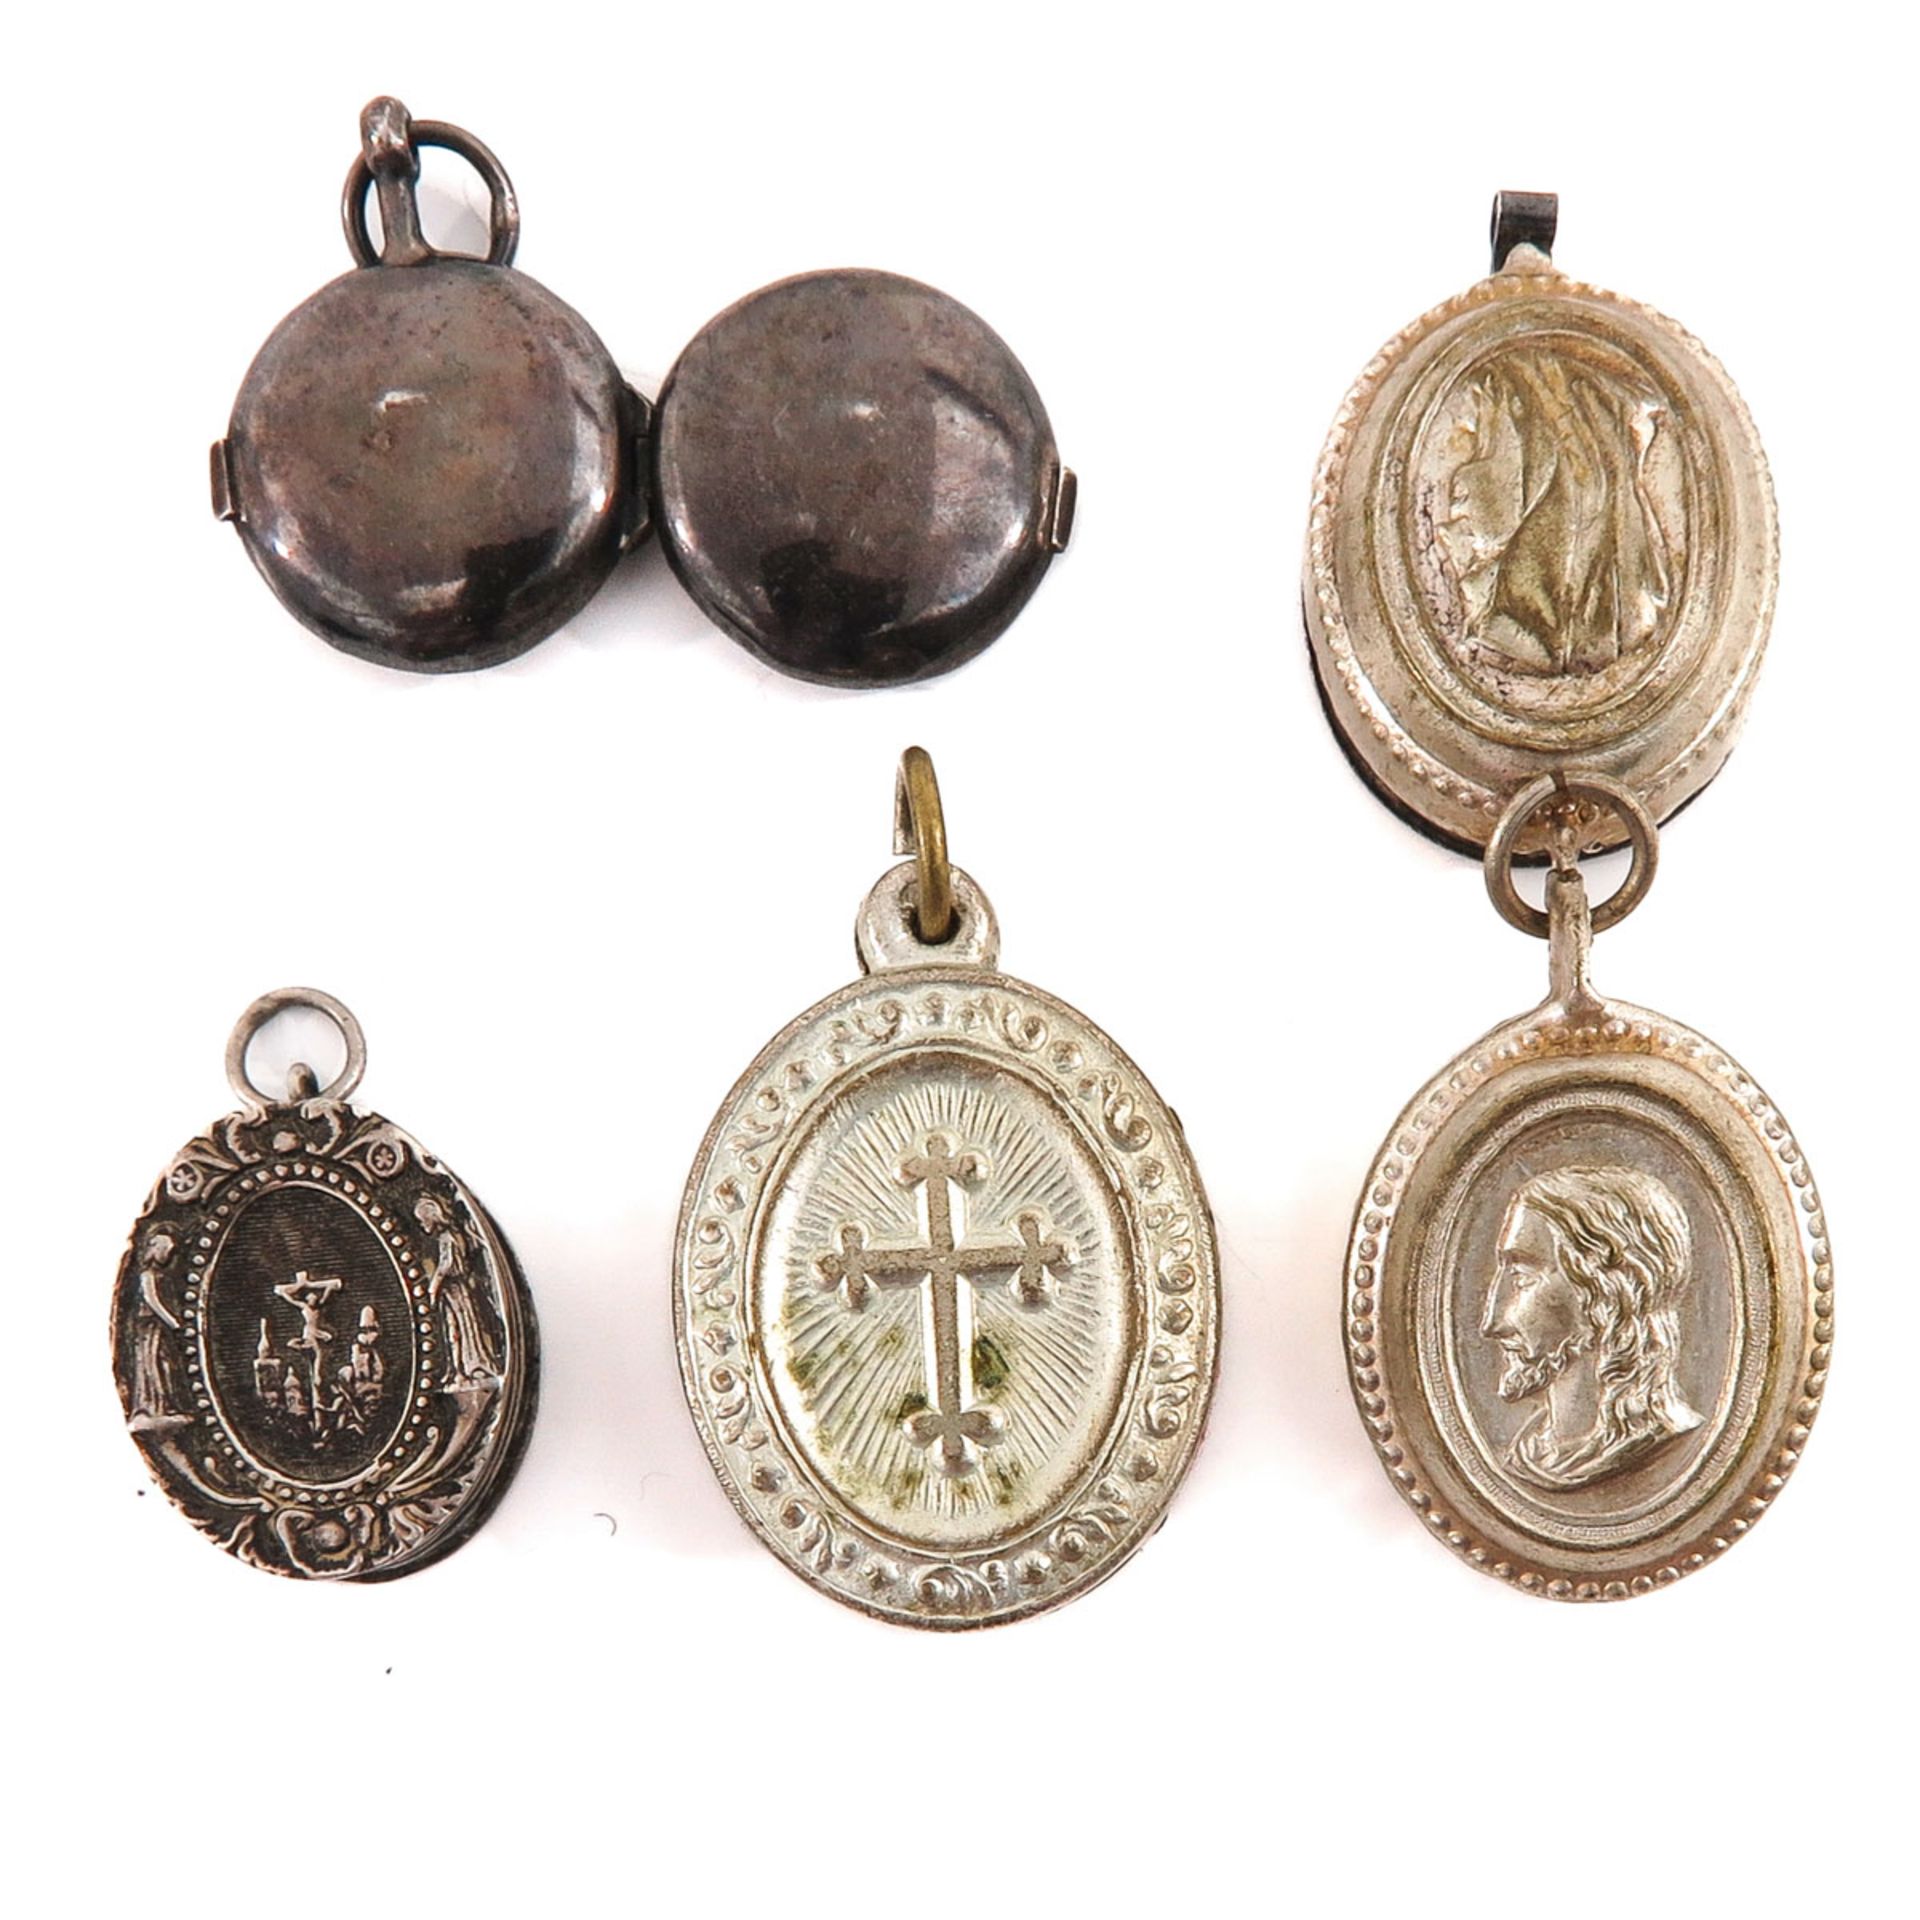 A Collection of 4 Relic Medallions - Image 2 of 6